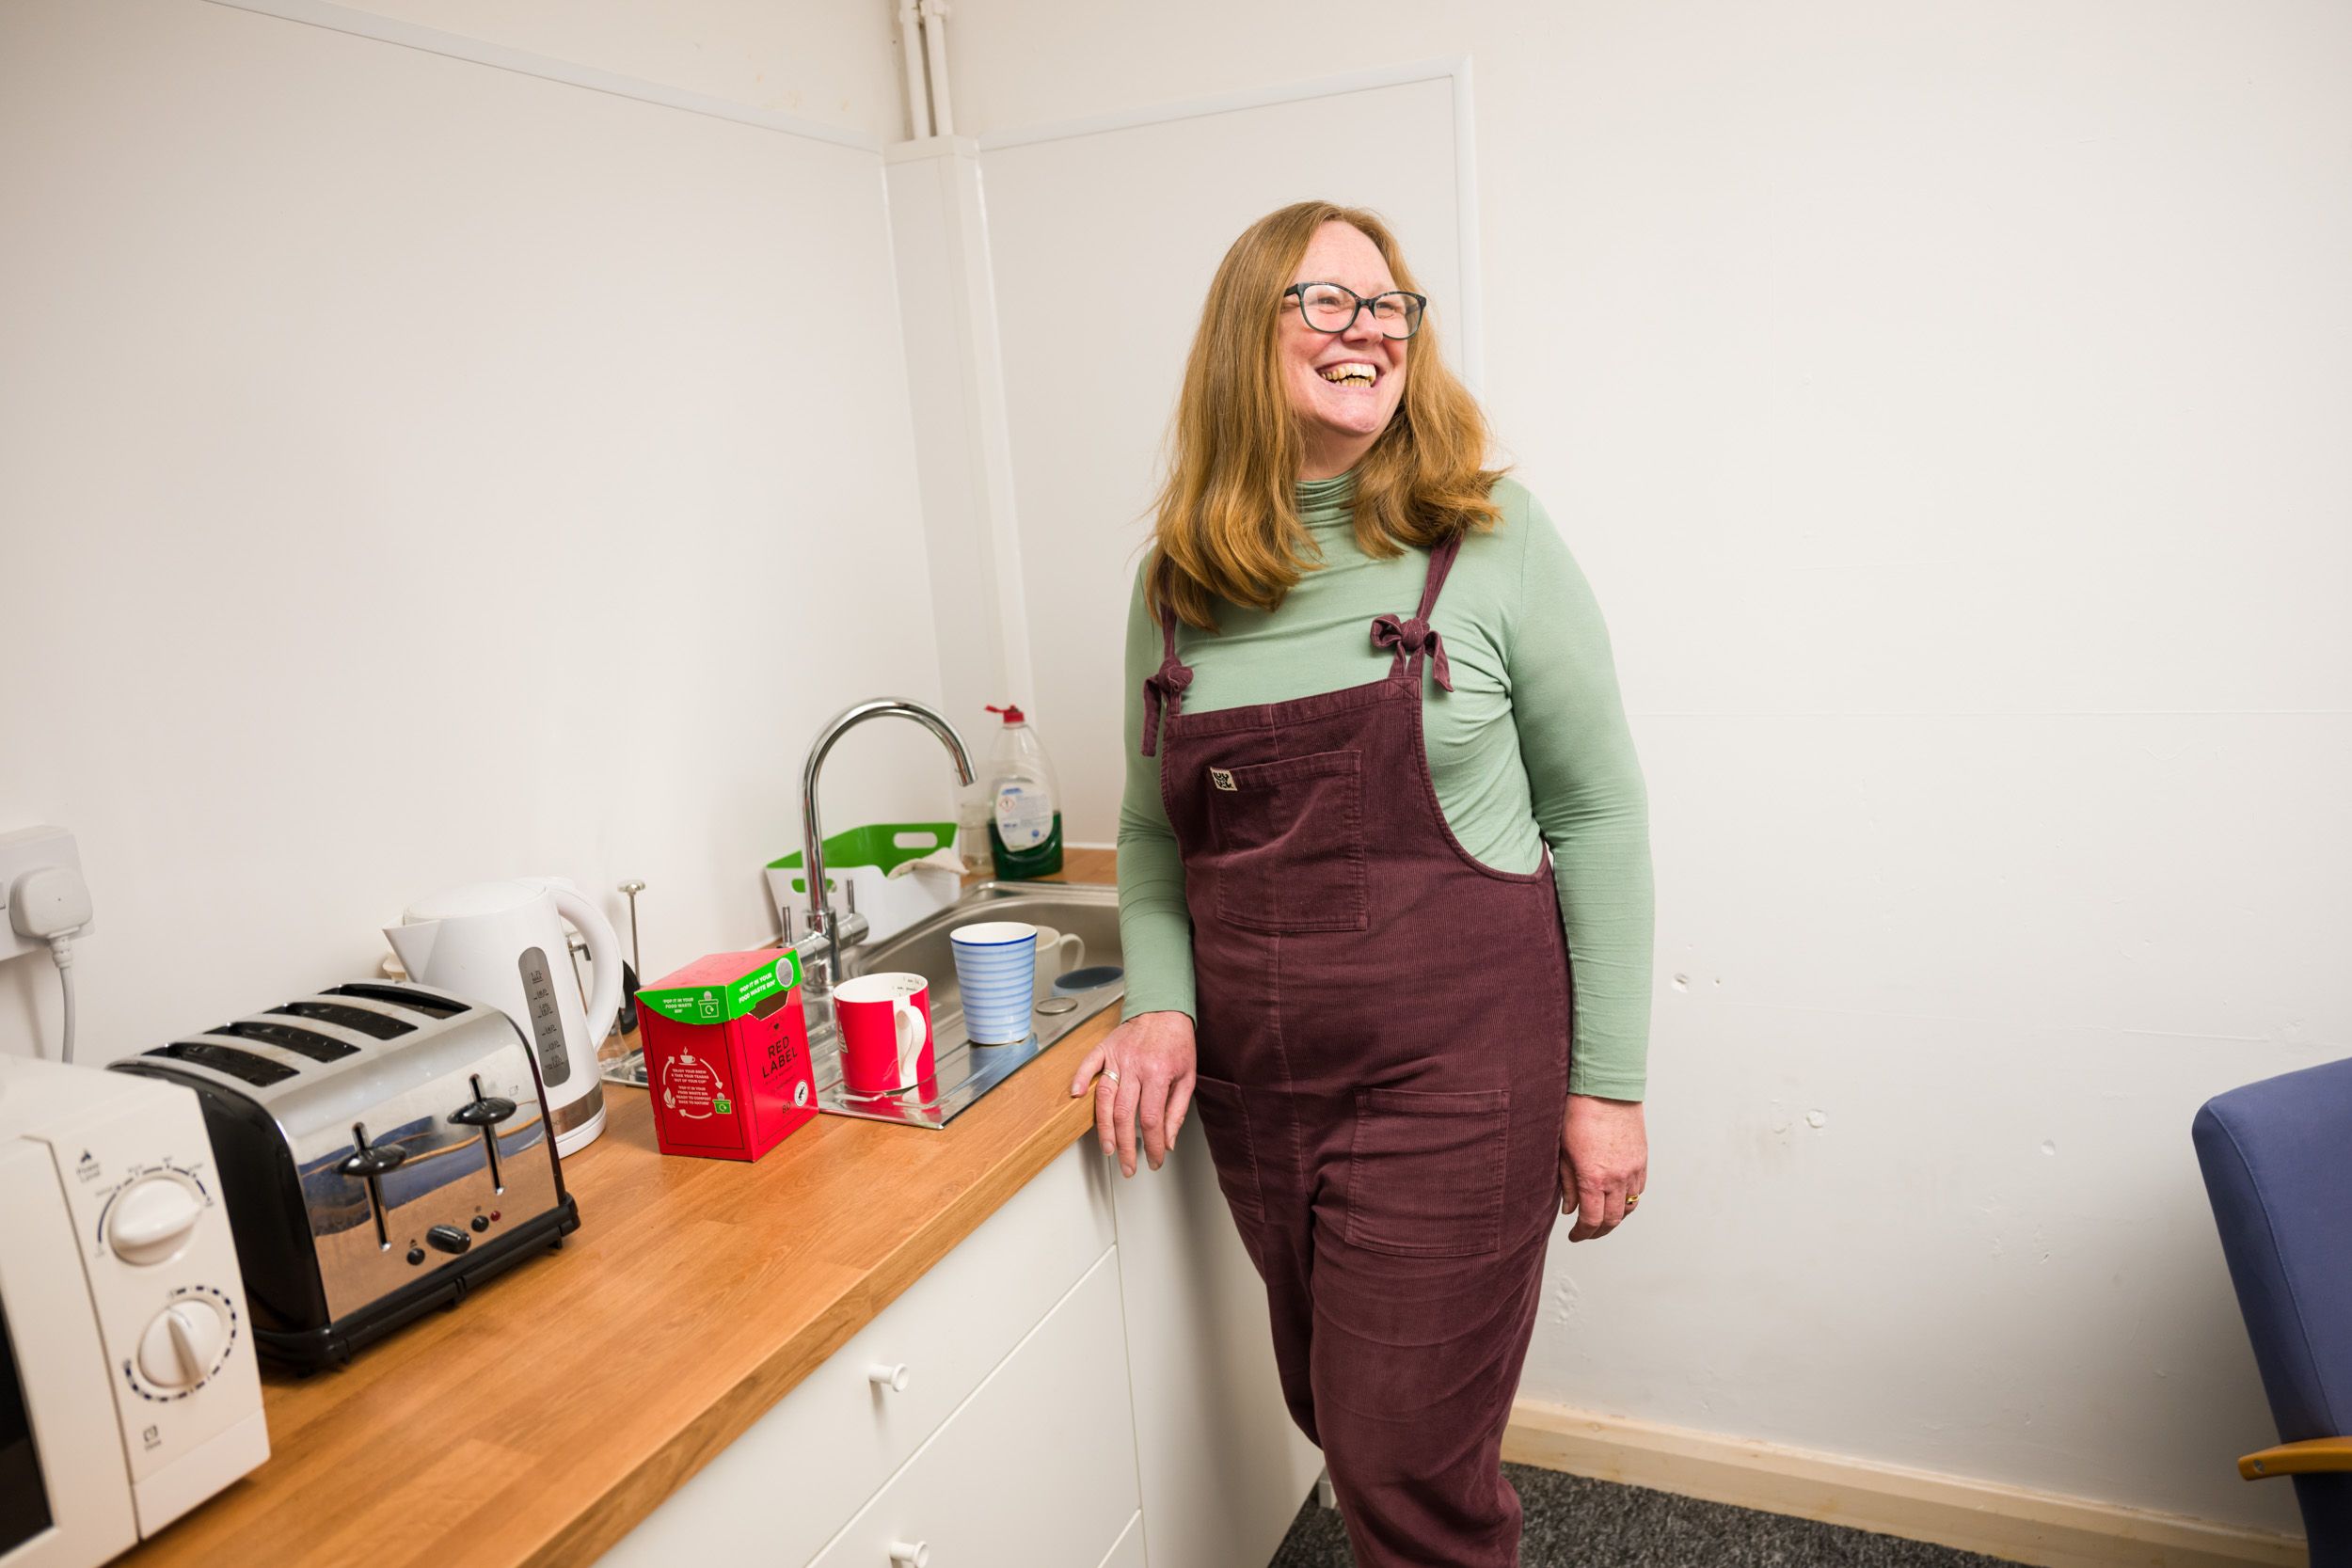 Volunteer in Open Homes Nottingham kitchen, supporting young homeless people